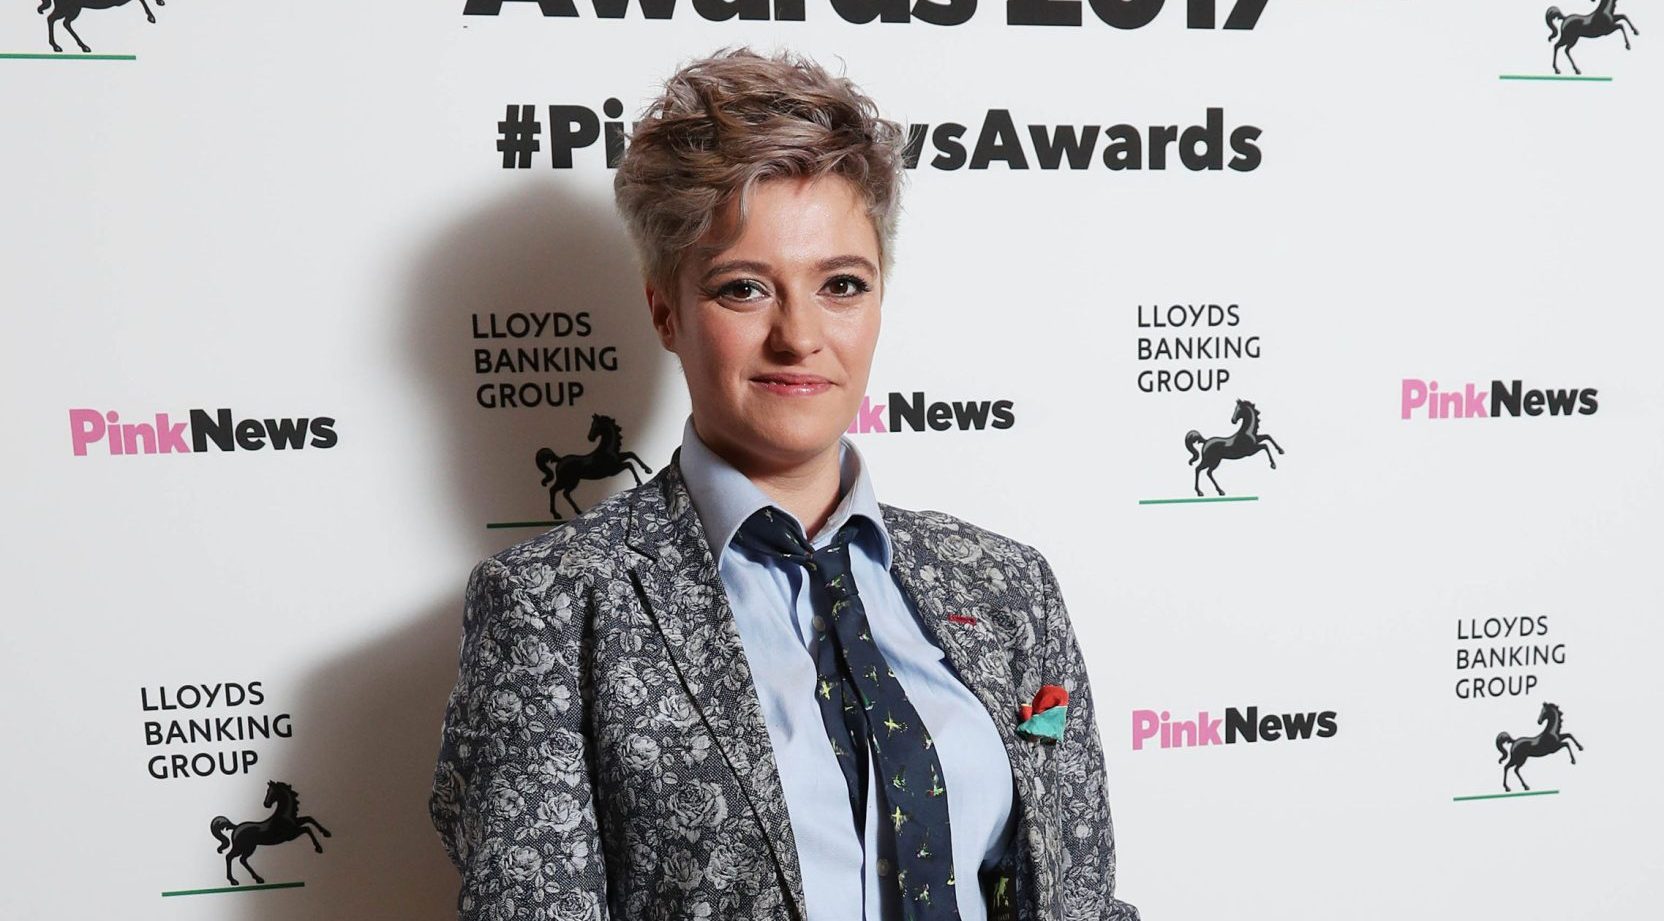 Cost-of-living: Jack Monroe says people doing ‘unthinkable things’ to survive